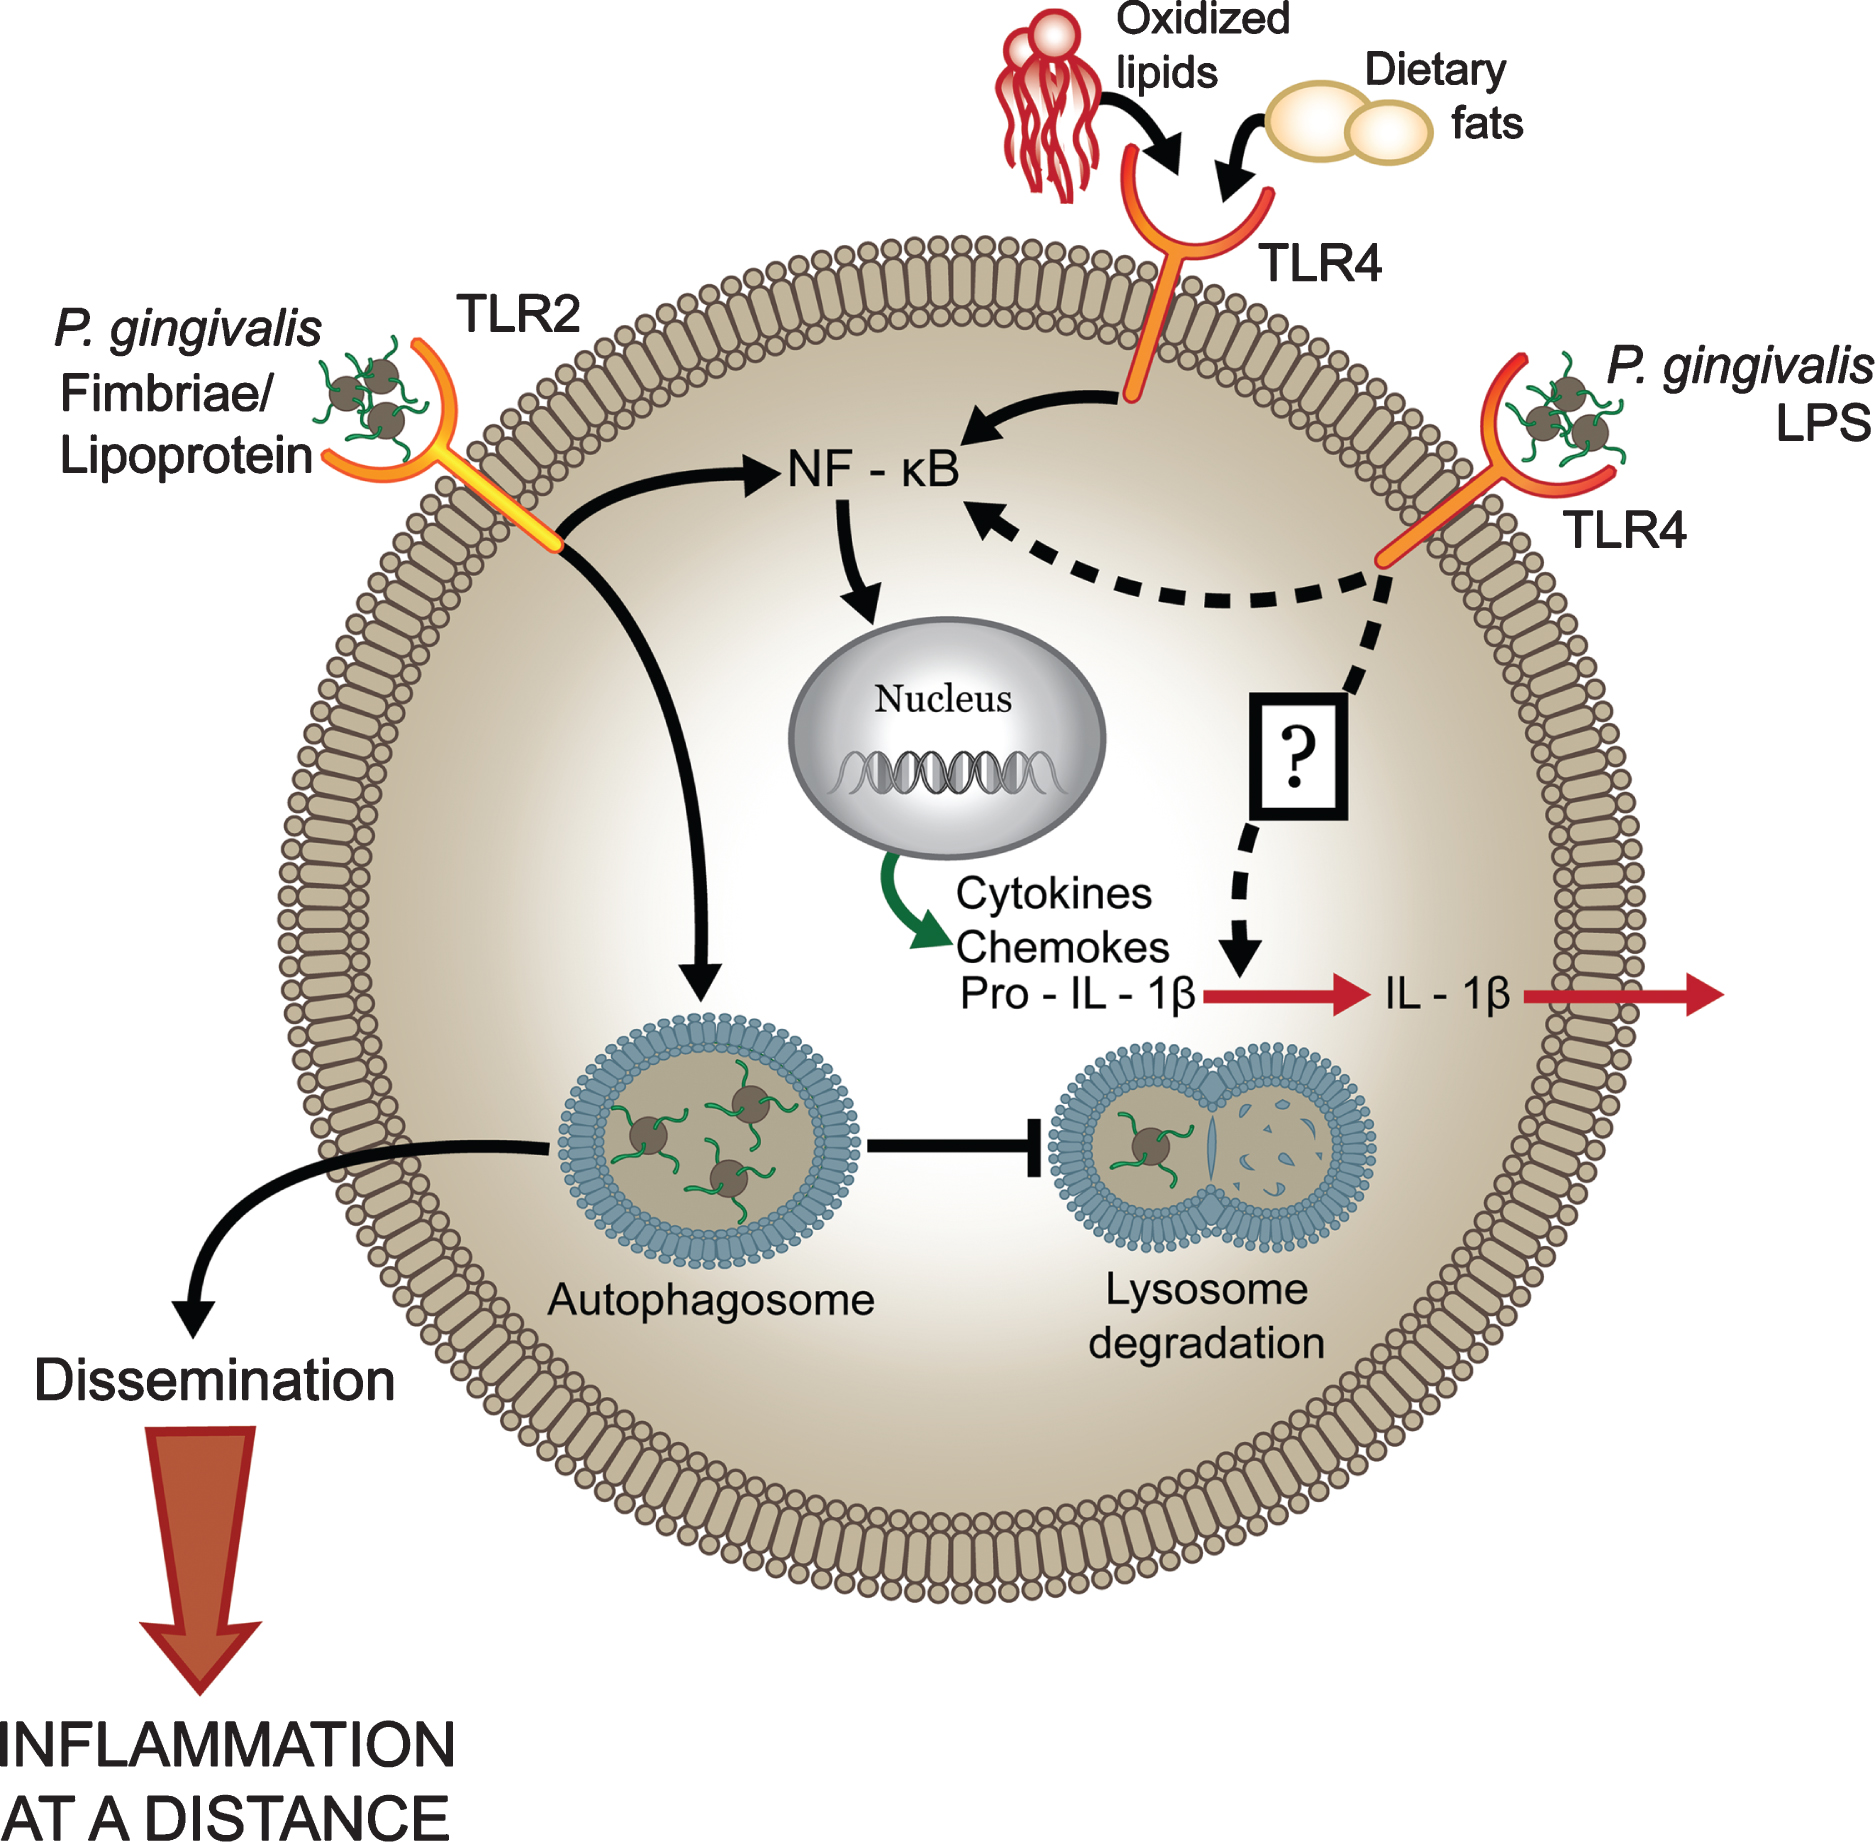 P. gingivalis dysregulates host cell immune activation facilitating systemic inflammation. The host predominantly senses P. gingivalis infection through engagement of TLR2 while the involvement of TLR4-dependent recognition is significantly impaired. Expression of antagonistic or immunologically inert lipid A by P. gingivalis attenuates production of proinflammatory mediators and prevents activation of the inflammasome (potentially through evasion of an unknown sensor) that facilitates intracellular survival. These events allow the pathogen to disseminate and to exacerbate systemic inflammation. In contrast, increased immunostimulatory potential at TLR4, through expression of an agonistic lipid A moiety, results in increased production of proinflammatory mediators, inflammasome activation, and reduced survival of the bacterium in macrophages leading to attenuated systemic inflammation. Reprinted with permission from Slocum C, Coats SR, Hua N, Kramer C, Papadopoulos G, Weinberg EO, Gudino CV, Hamilton JA, Darveau RP, Genco CA (2014) Distinct lipid A moieties contribute to pathogen-induced site-specific vascular inflammation. PLoS Pathog 10, e1004215, under the terms of the Creative Commons Attribution License.